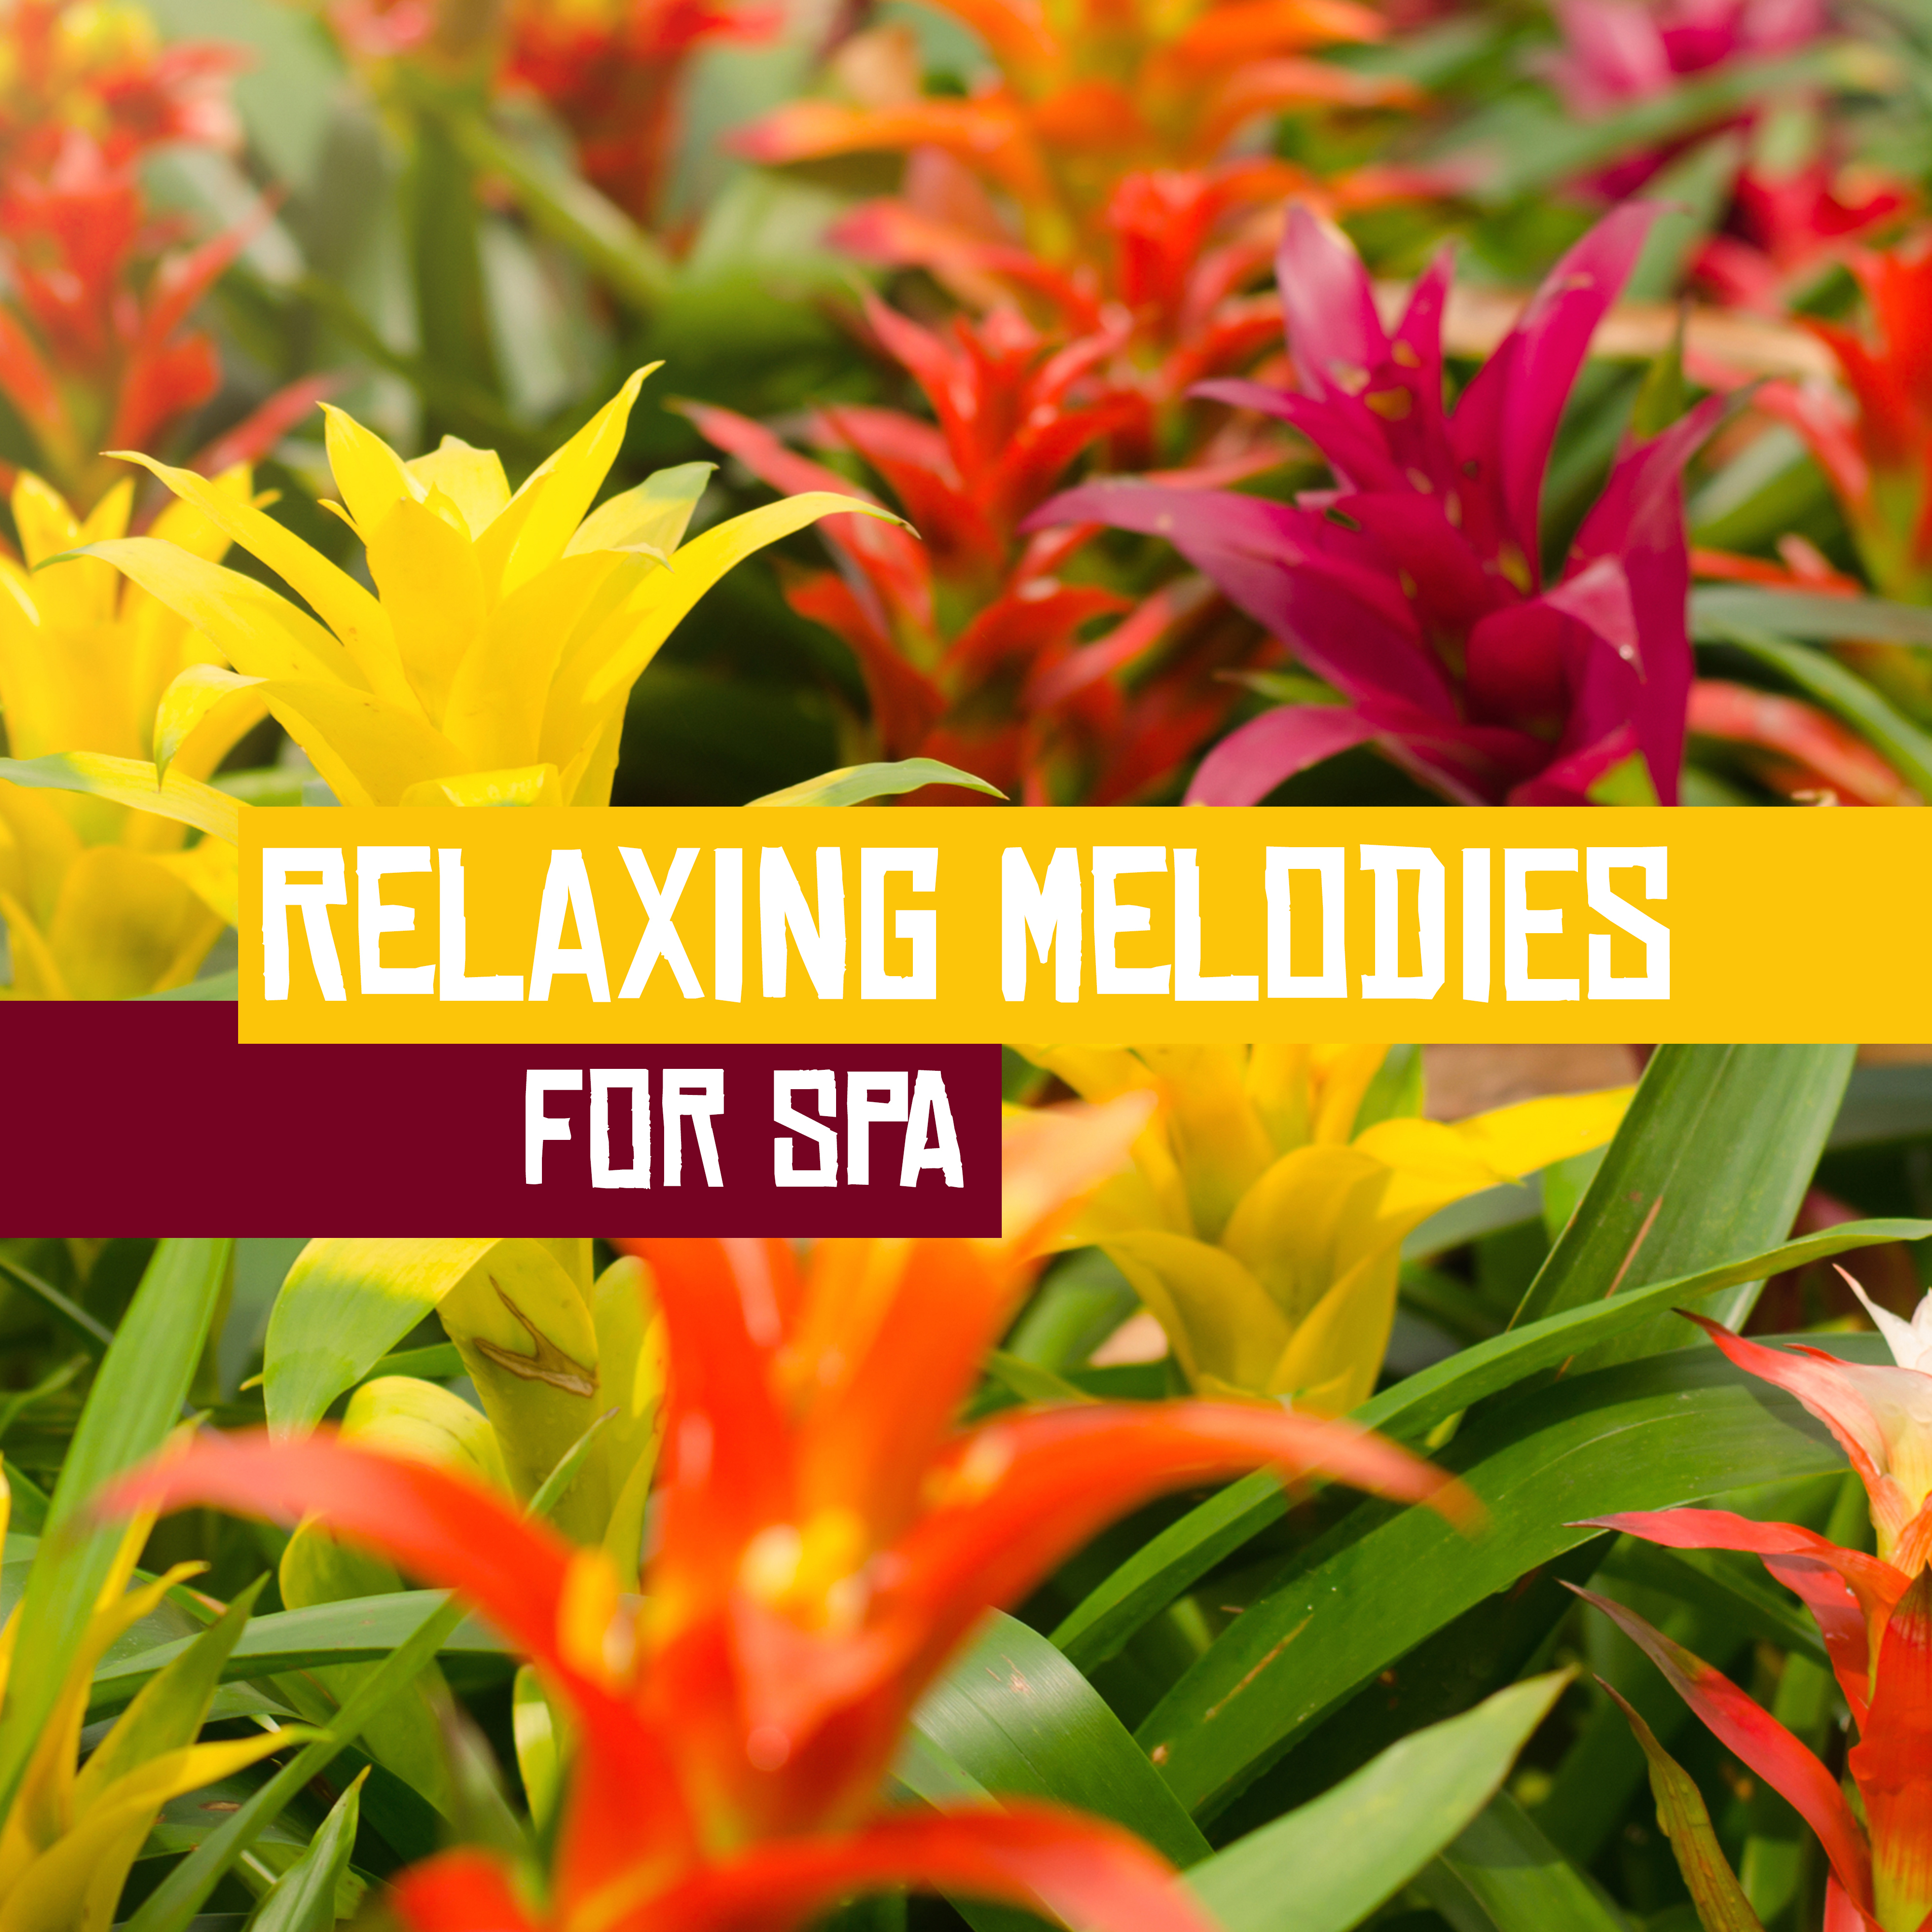 Relaxing Melodies for Spa